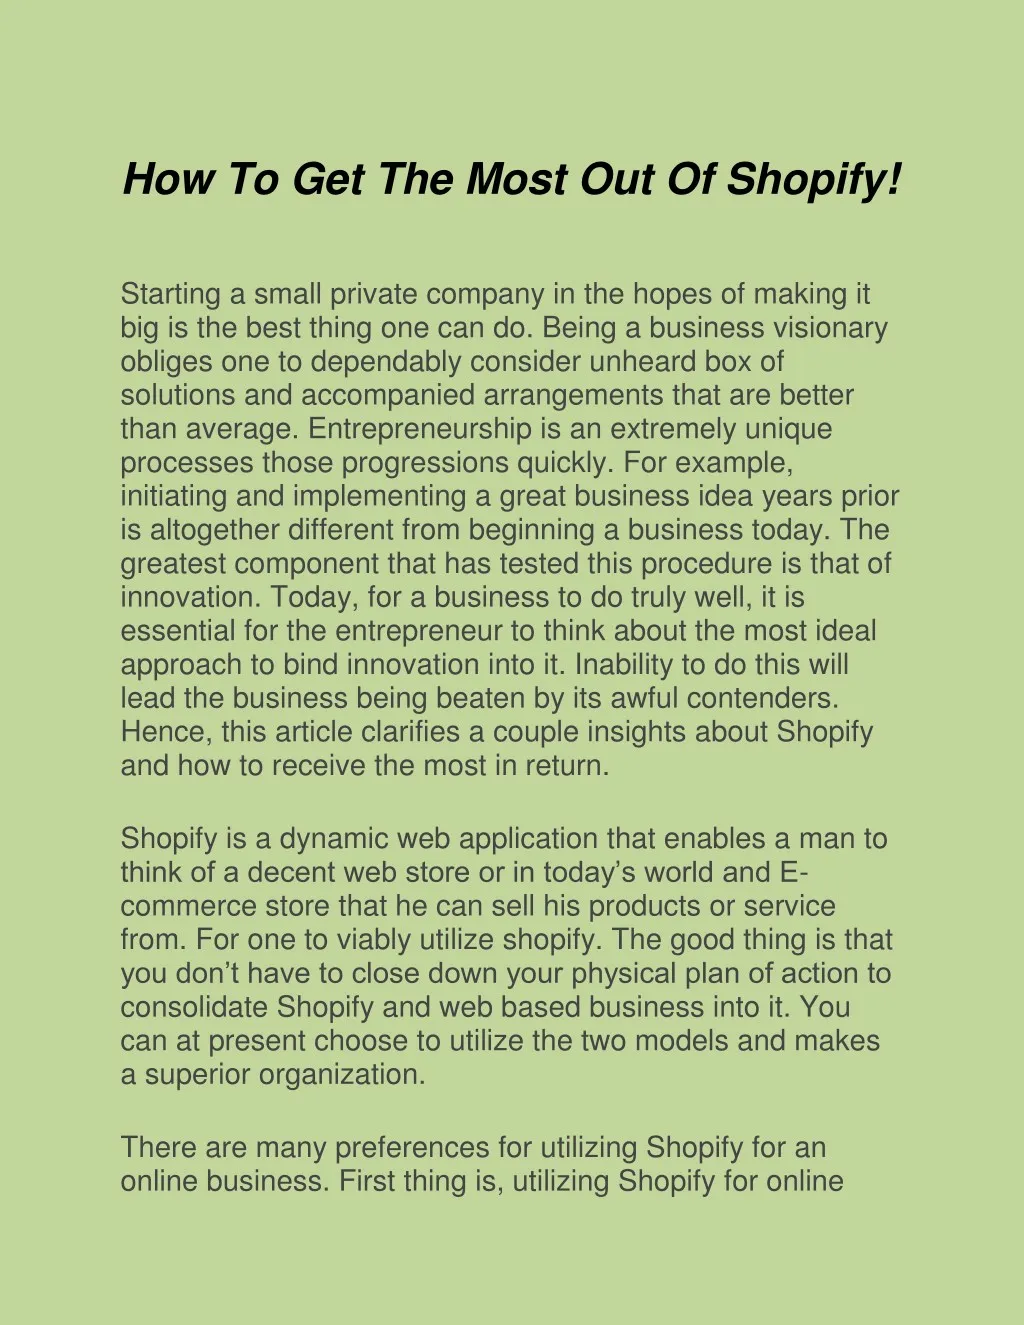 how to get the most out of shopify